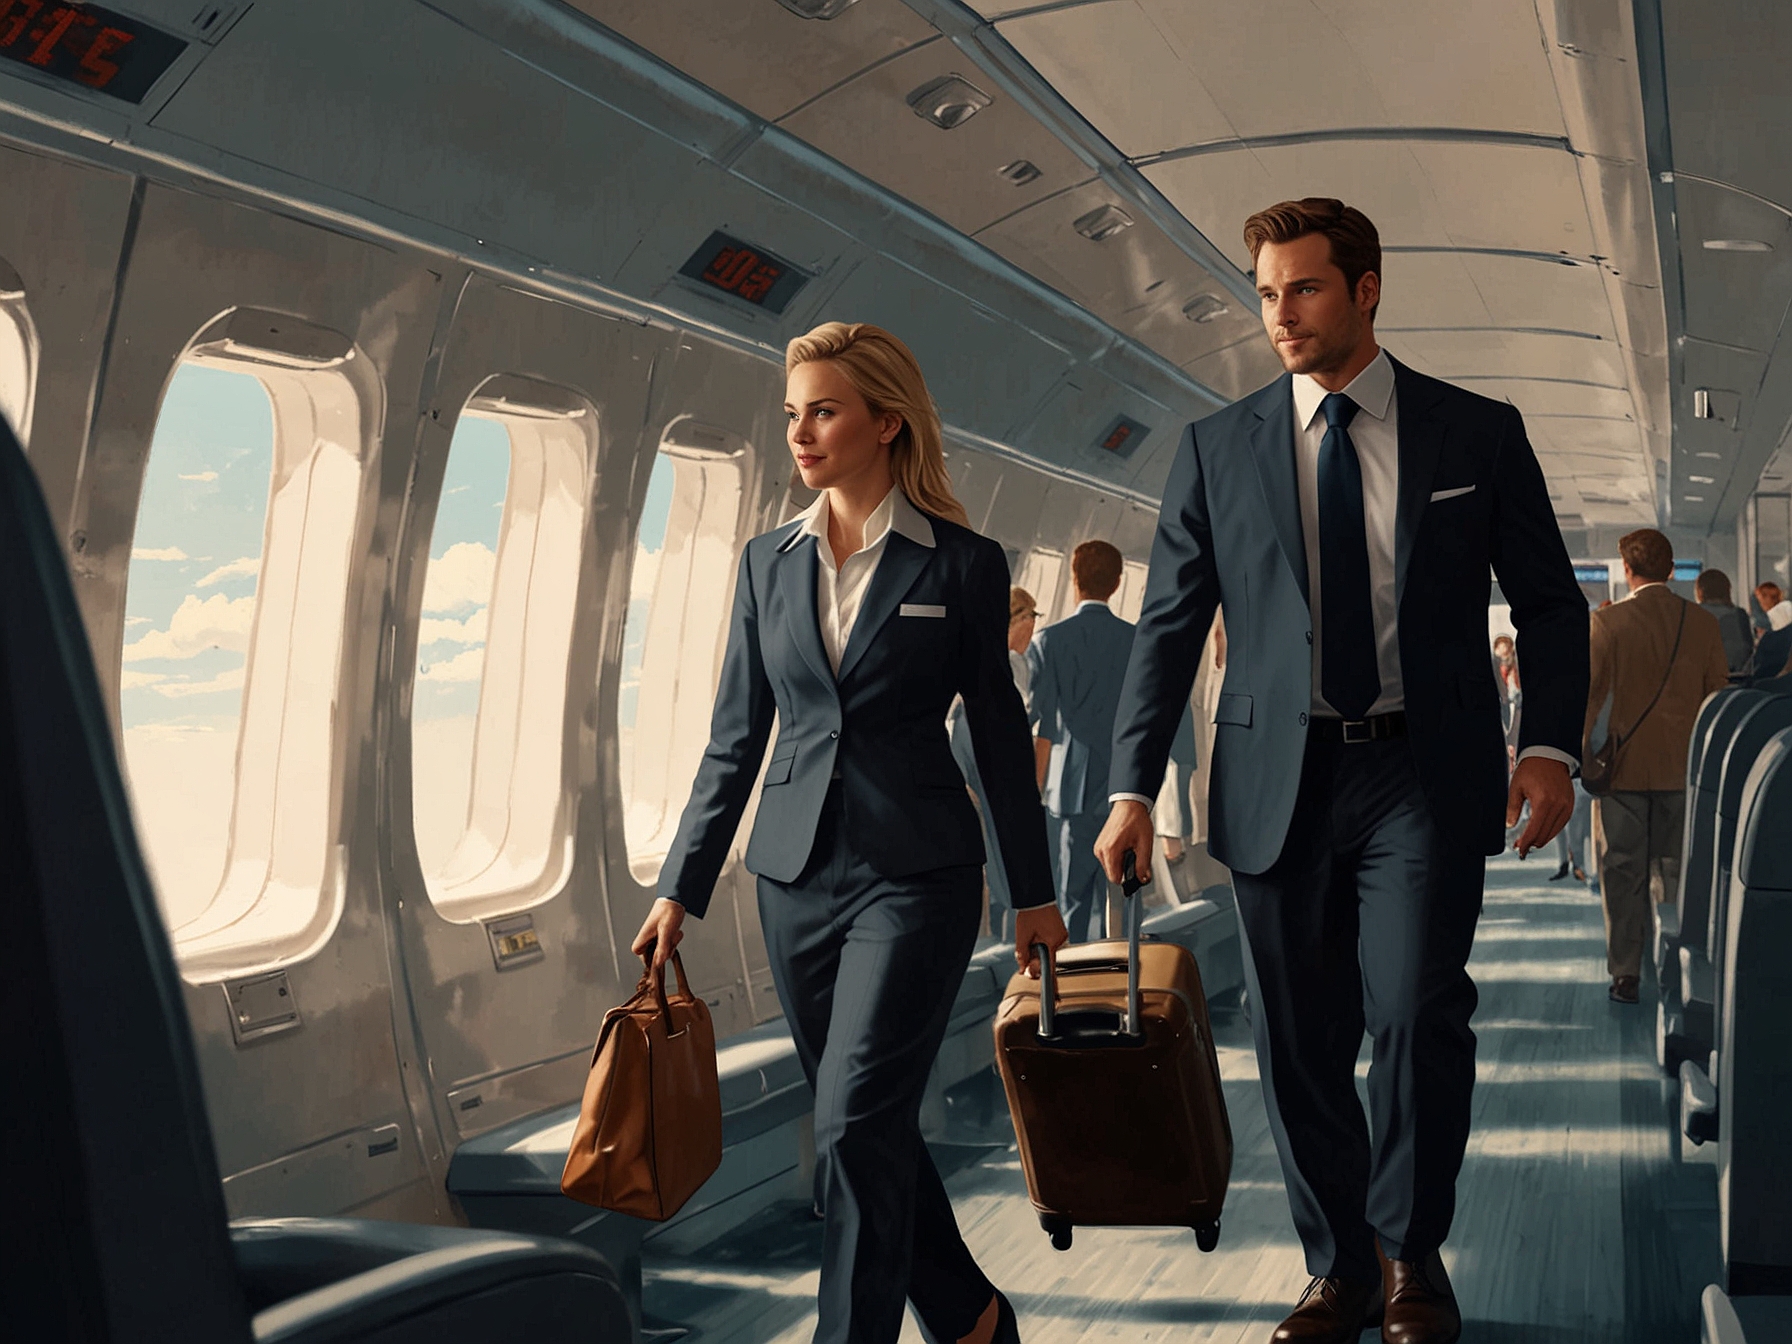 Passengers orderly exiting an airplane, starting with those closest to the exit. Flight attendants provide guidance, ensuring a smooth and organized disembarkation.